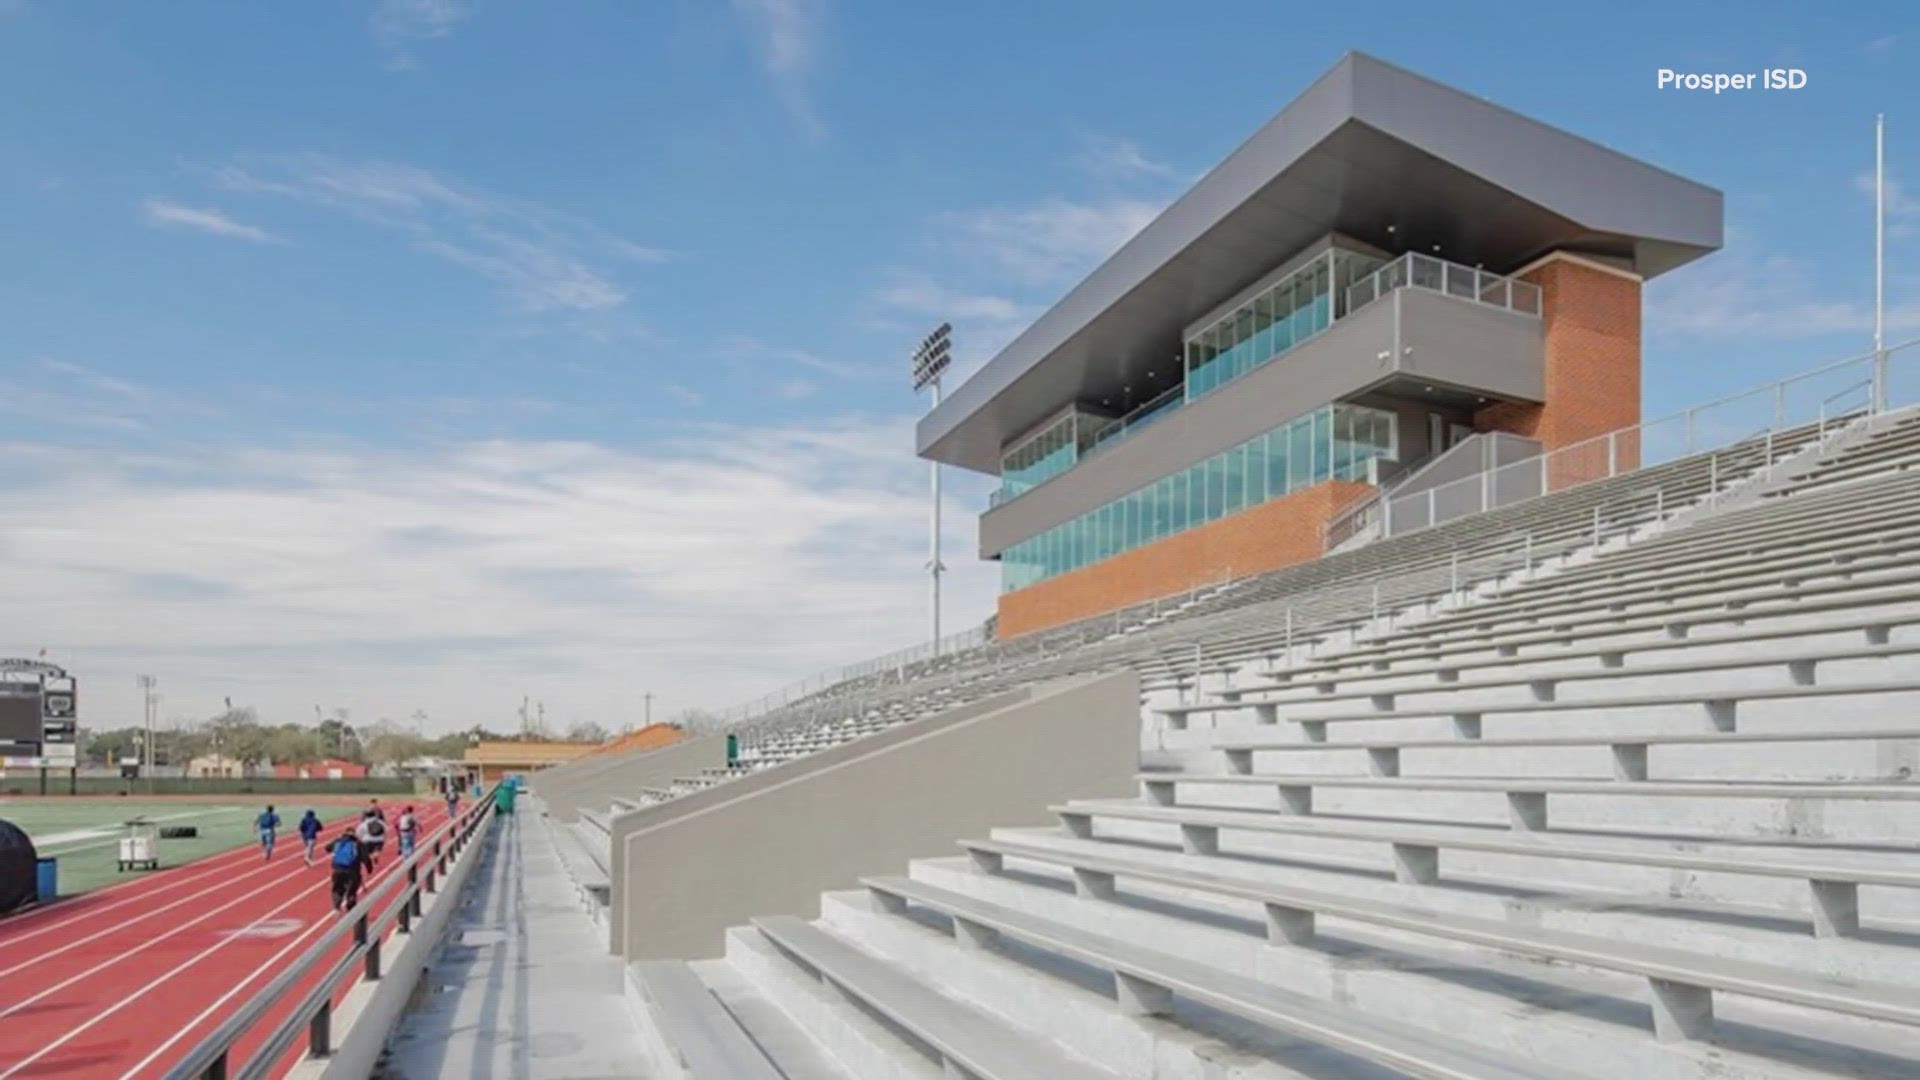 The proposed high school stadium was part of a four-proposition bond package, totaling $2.8 billion.